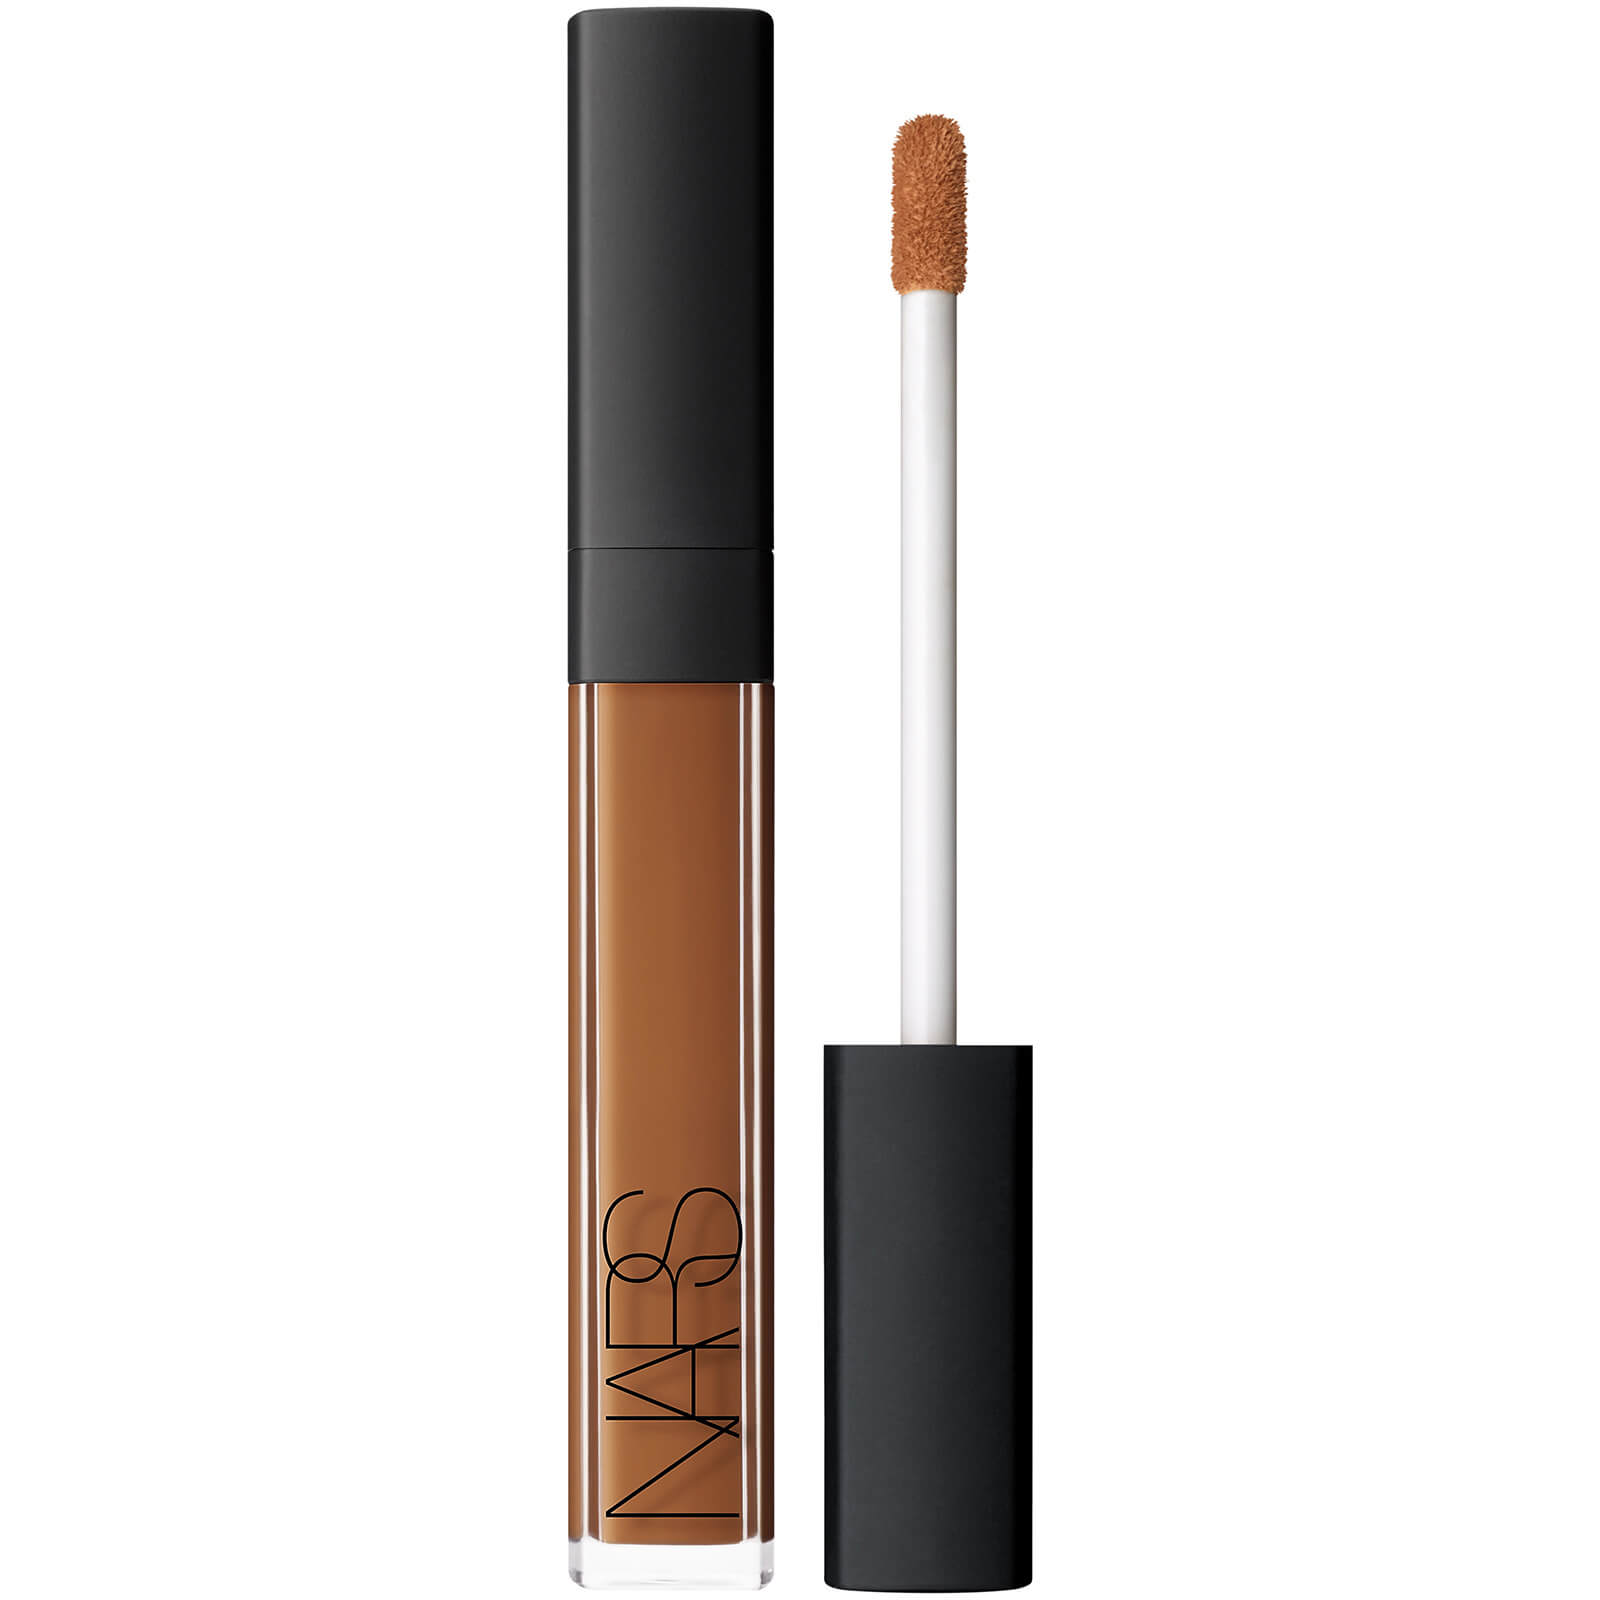 NARS Cosmetics Radiant Creamy Concealer (Various Shades) - Cafe